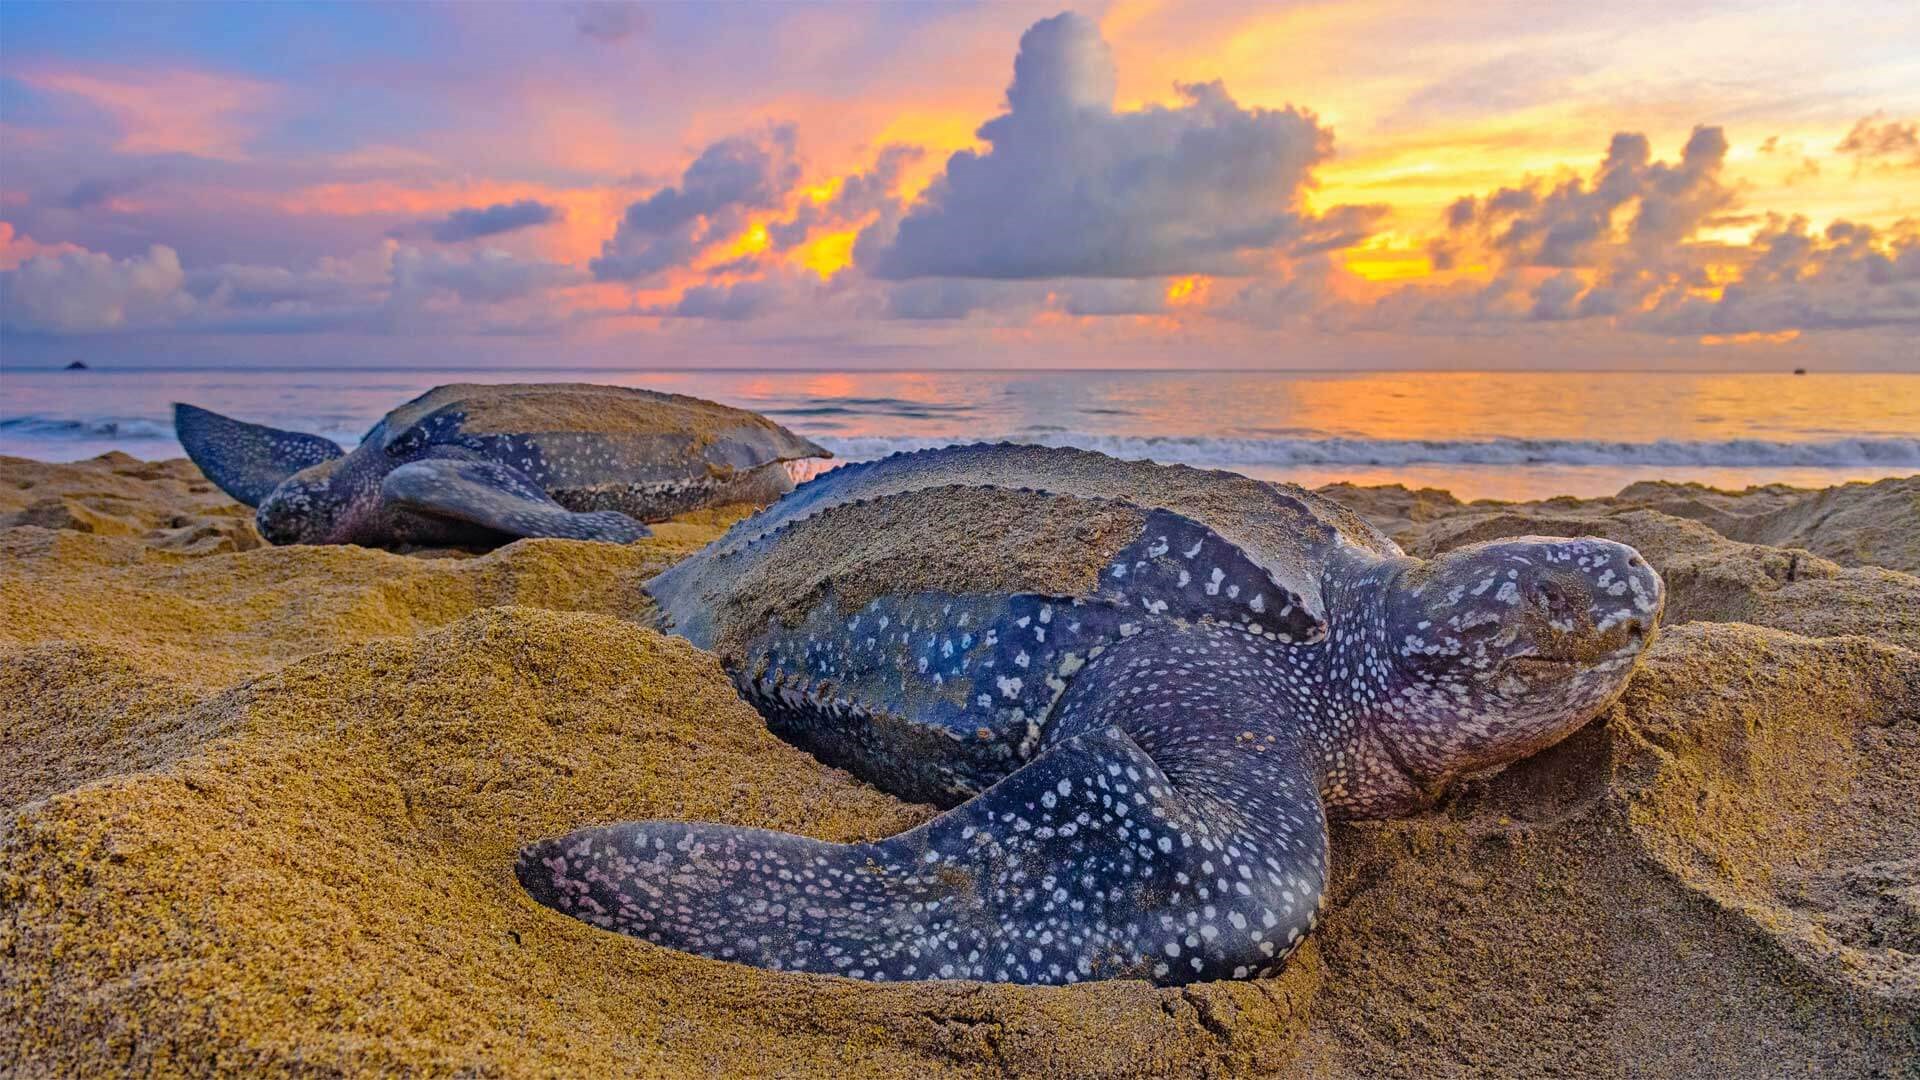 Nature Seekers TT wants access to monitor sea turtles at night